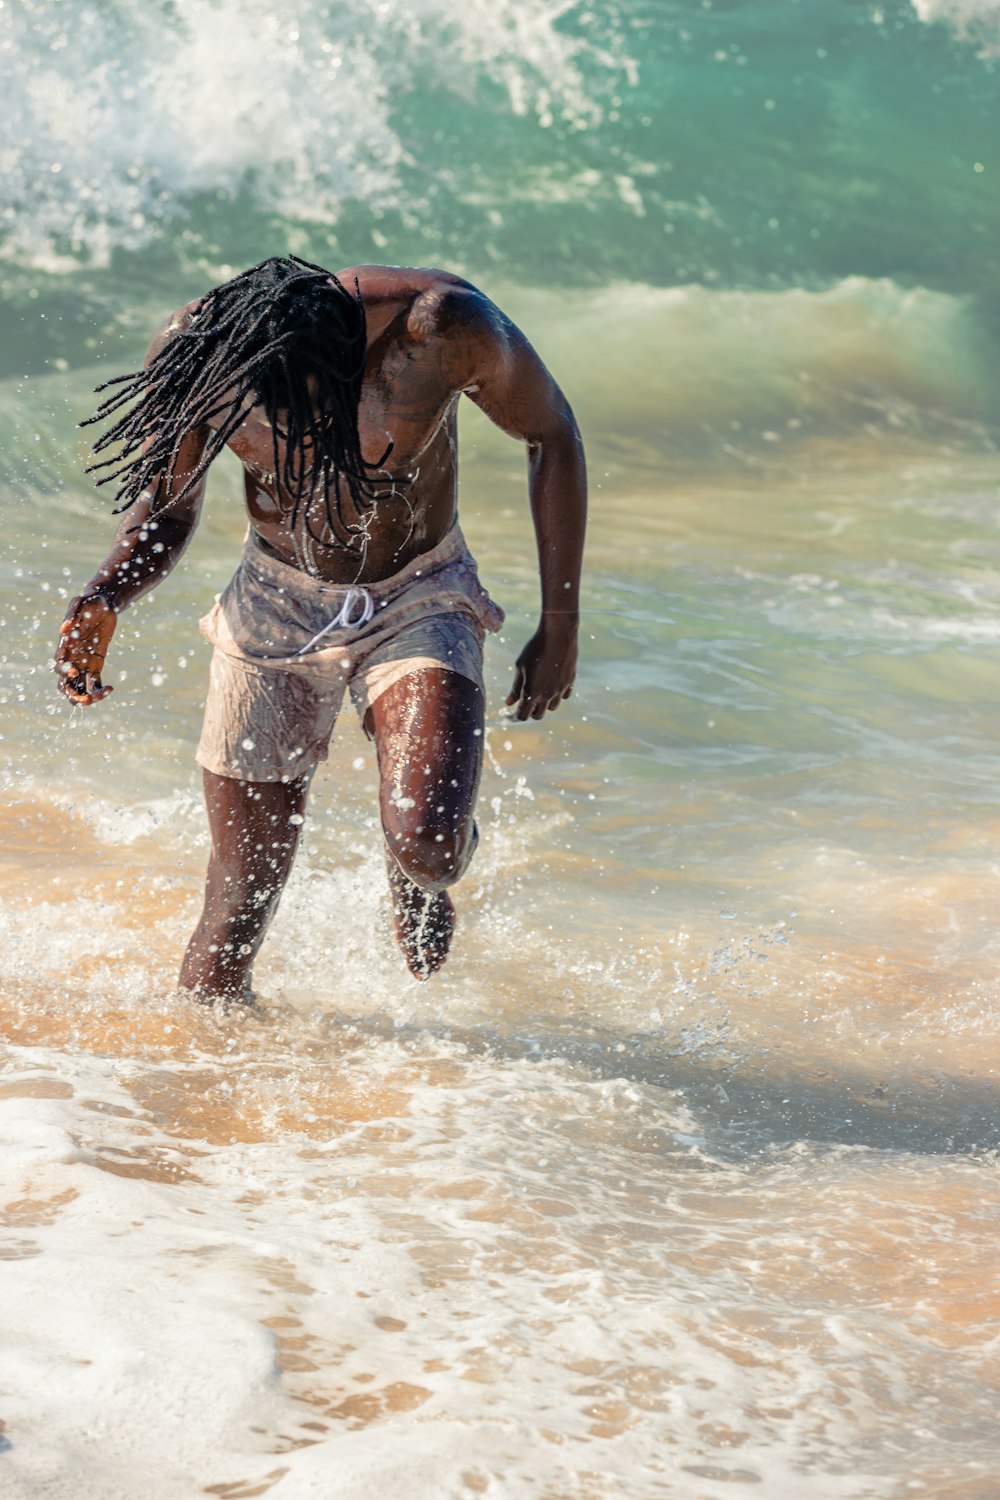 a man with dreadlocks running into the ocean